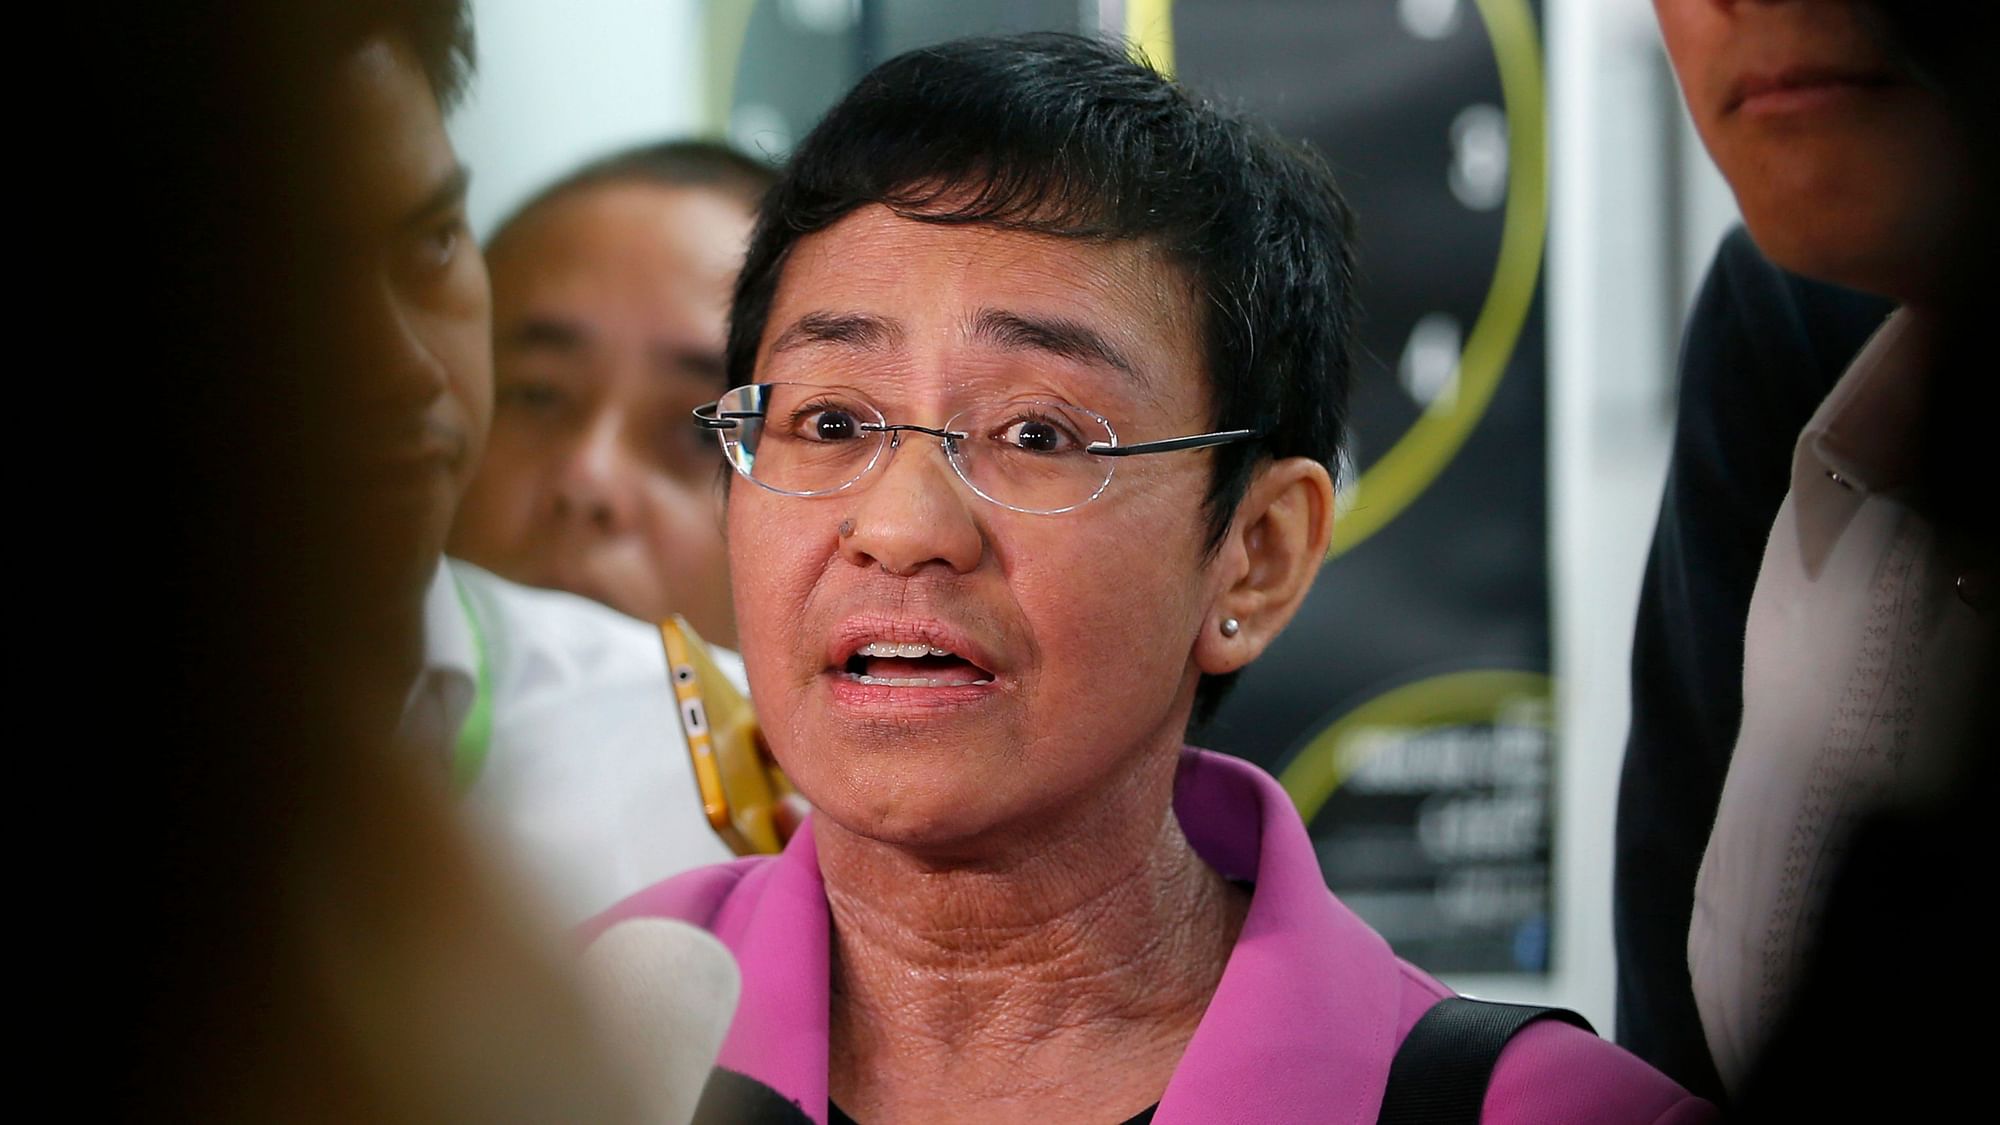 Maria Ressa, CEO of the online news agency Rappler, talks to the media after attending the summons by the National Bureau of Investigation on the cyber libel complaint.